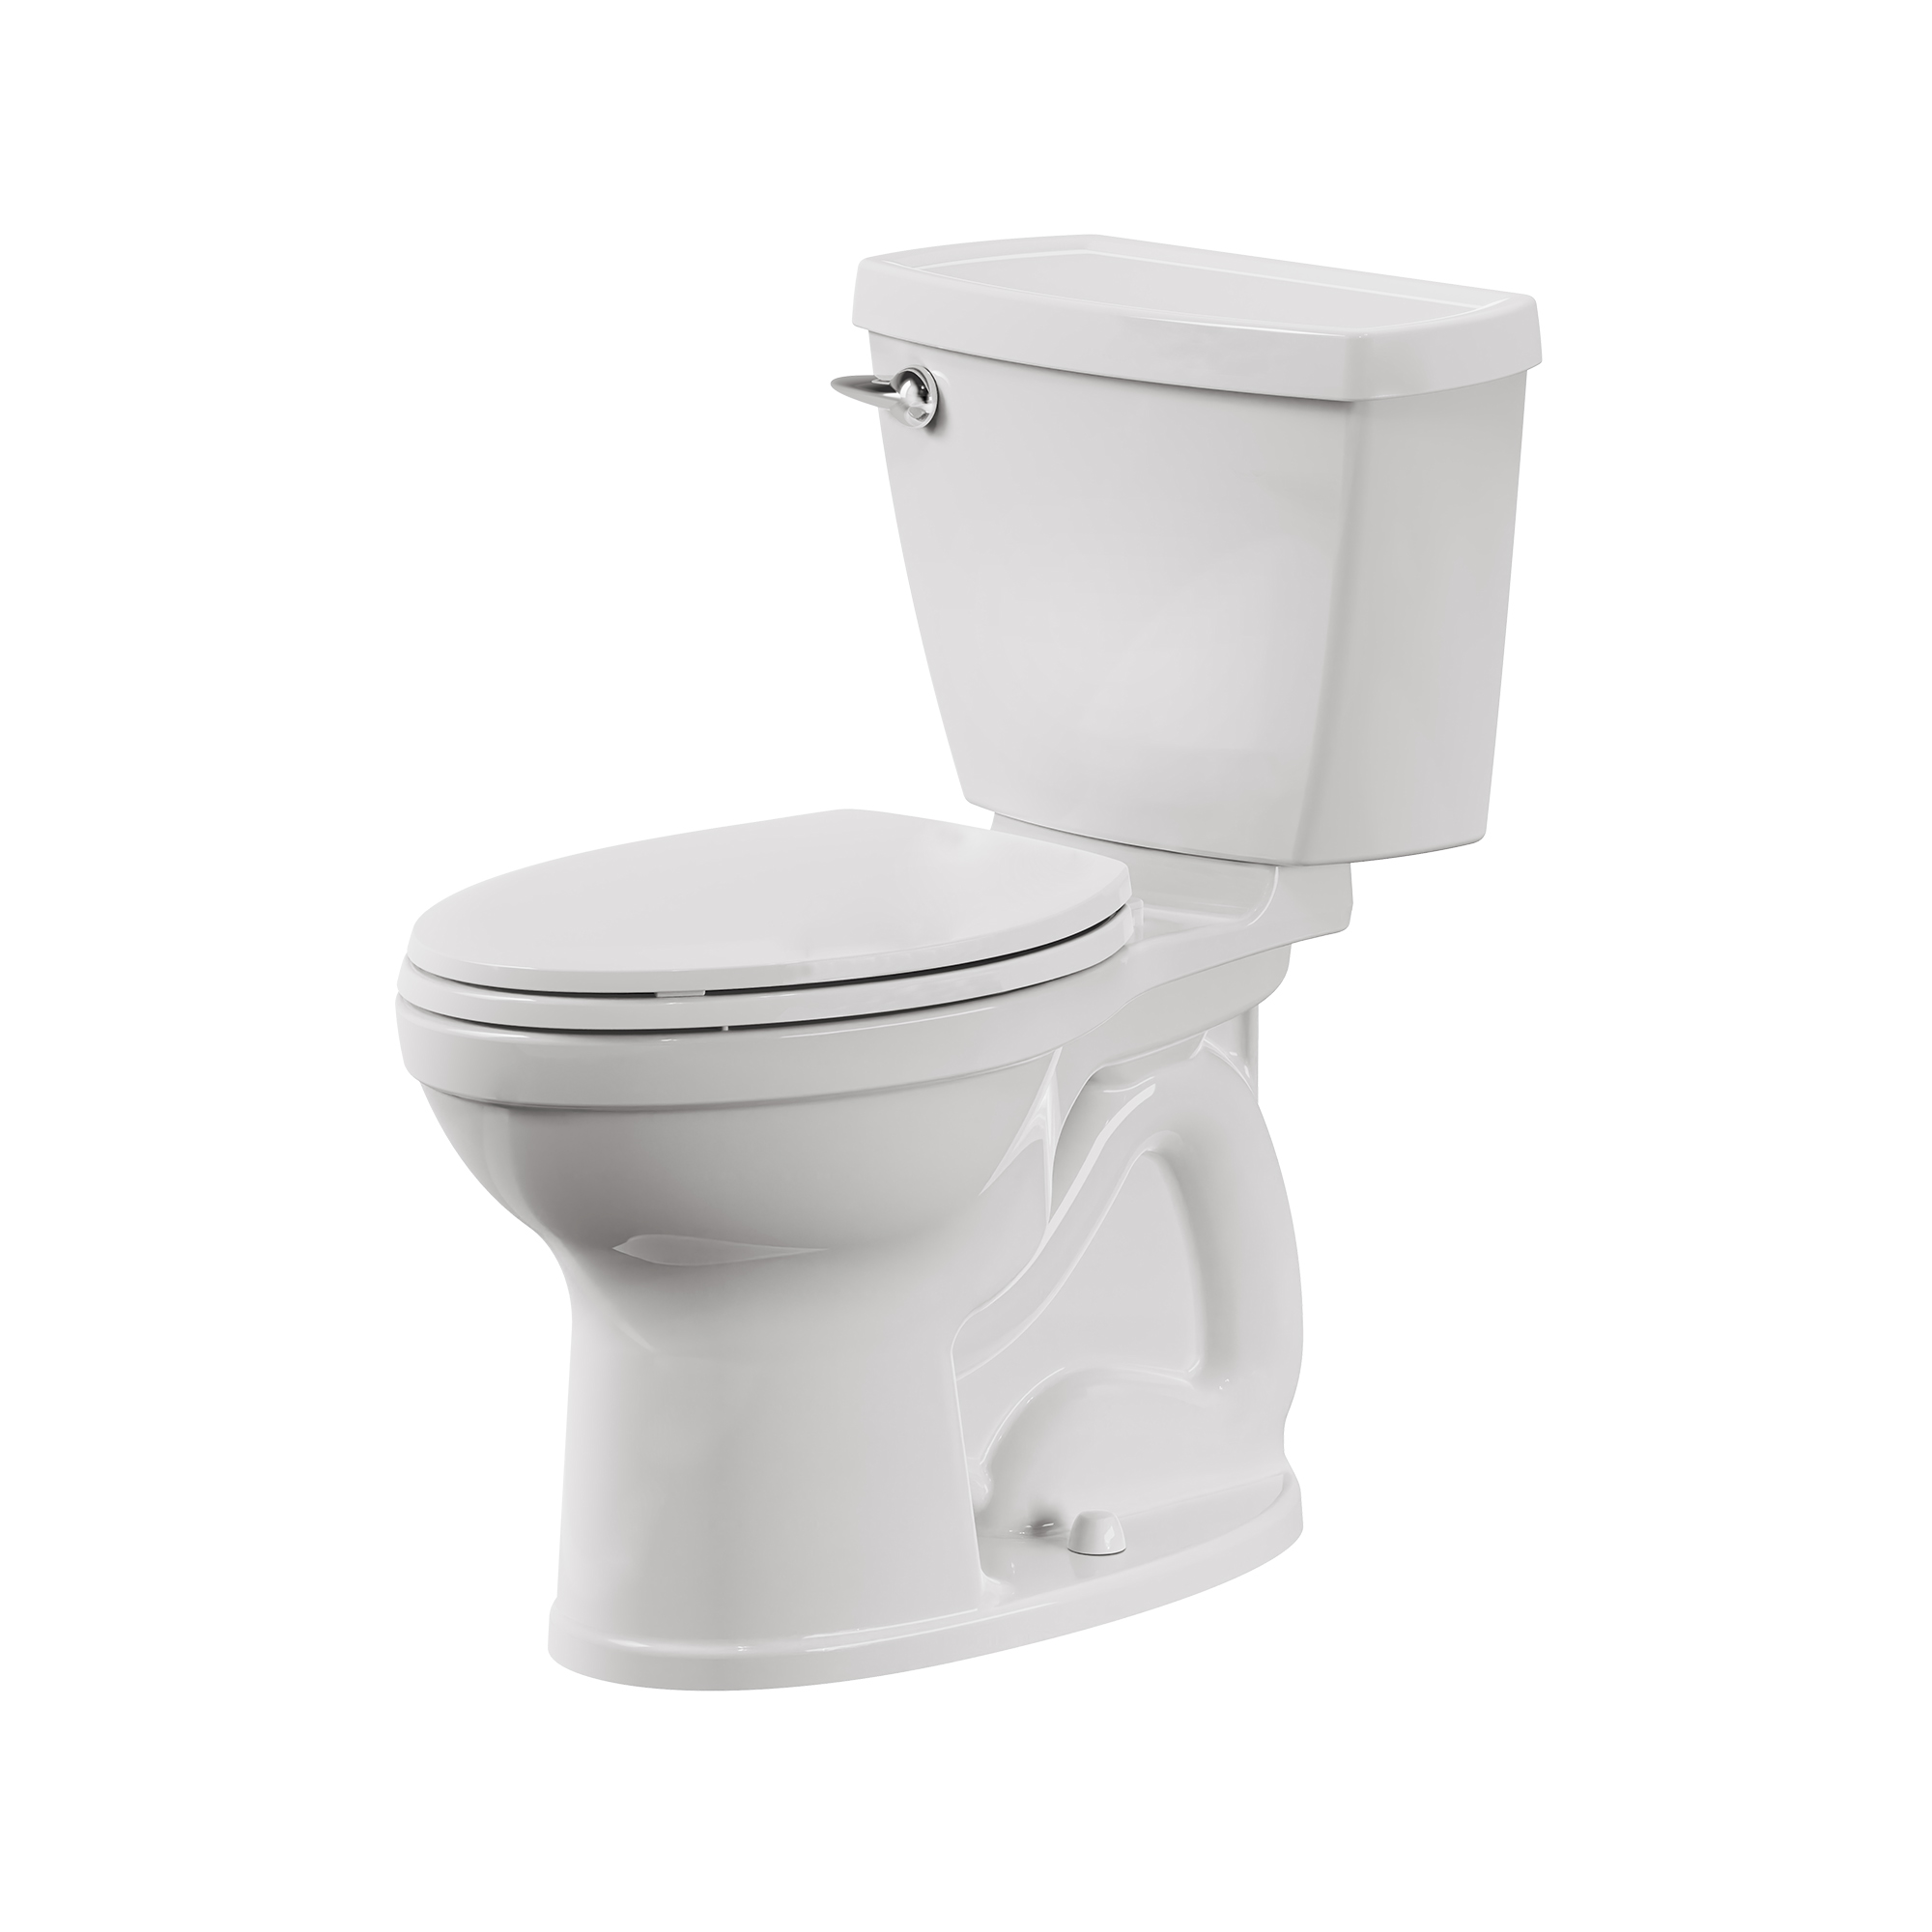 Champion 4 Two-Piece 1.28 gpf/4.8 Lpf Chair Height Elongated Complete Toilet With Seat and Lined Tank